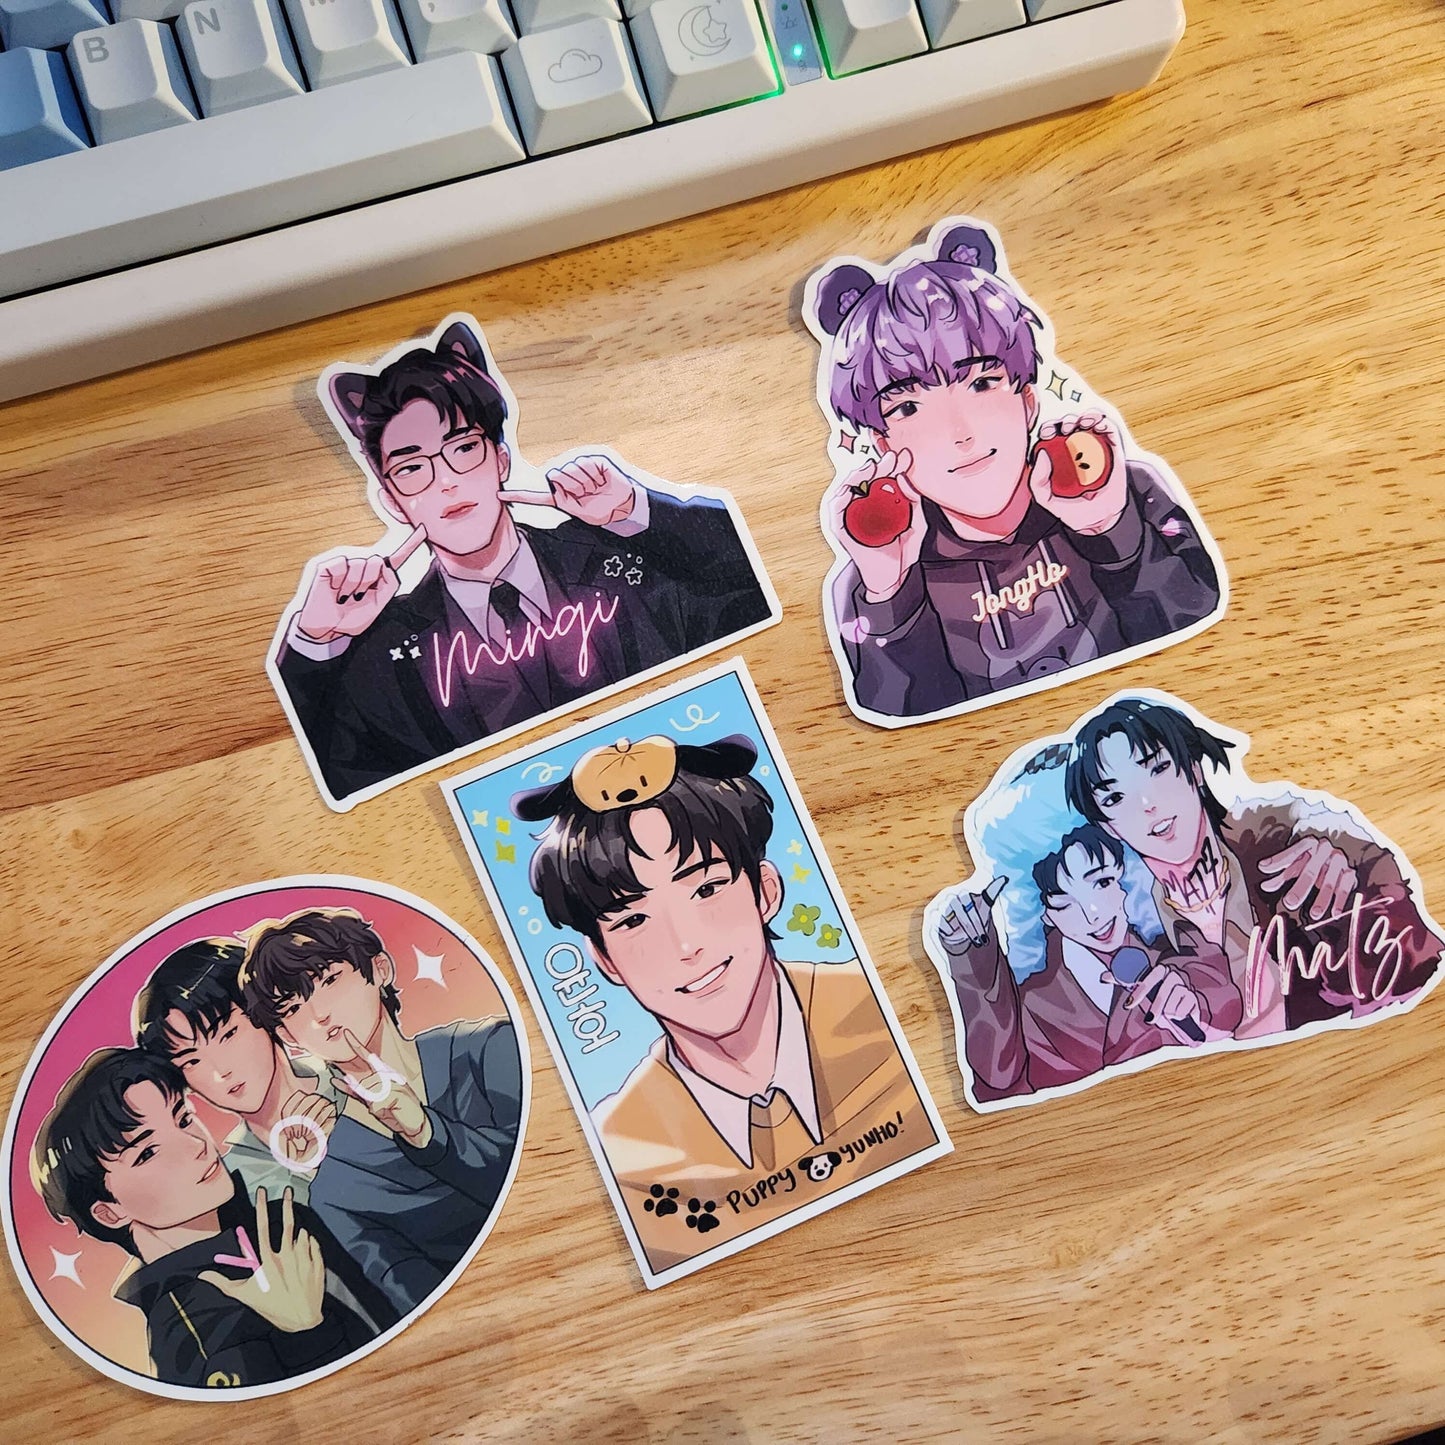 Cool Kpop Pirate Boys Stickers